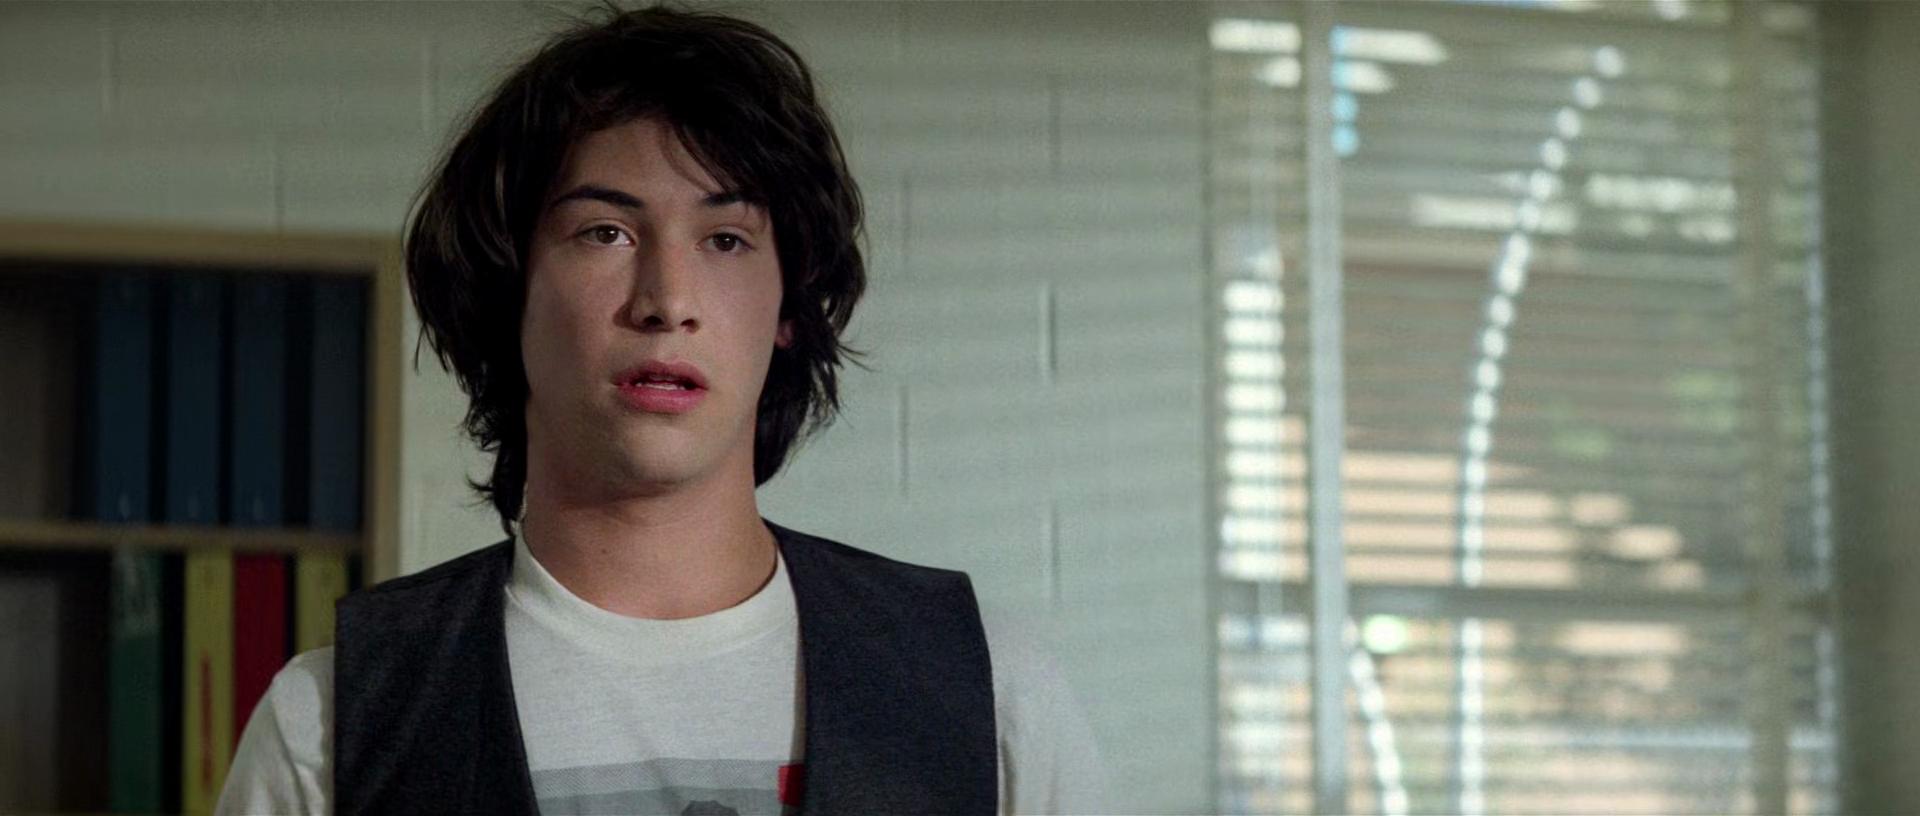 how old was keanu reeves in bill and ted's excellent adventure